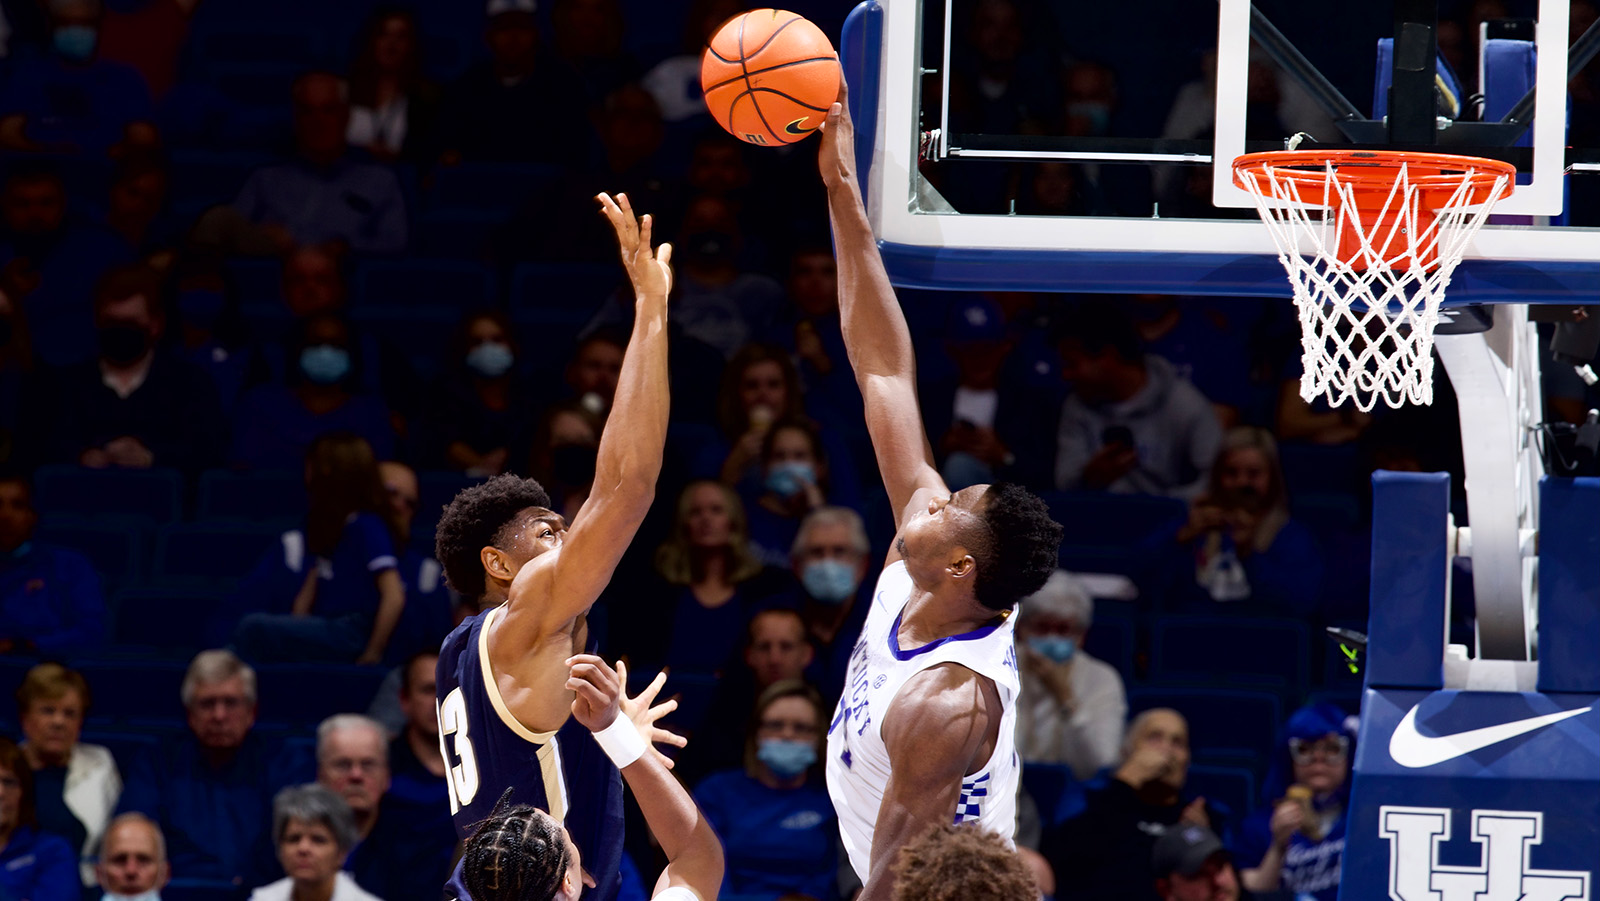 Kentucky Rolls Past Mount St. Mary's on Tuesday